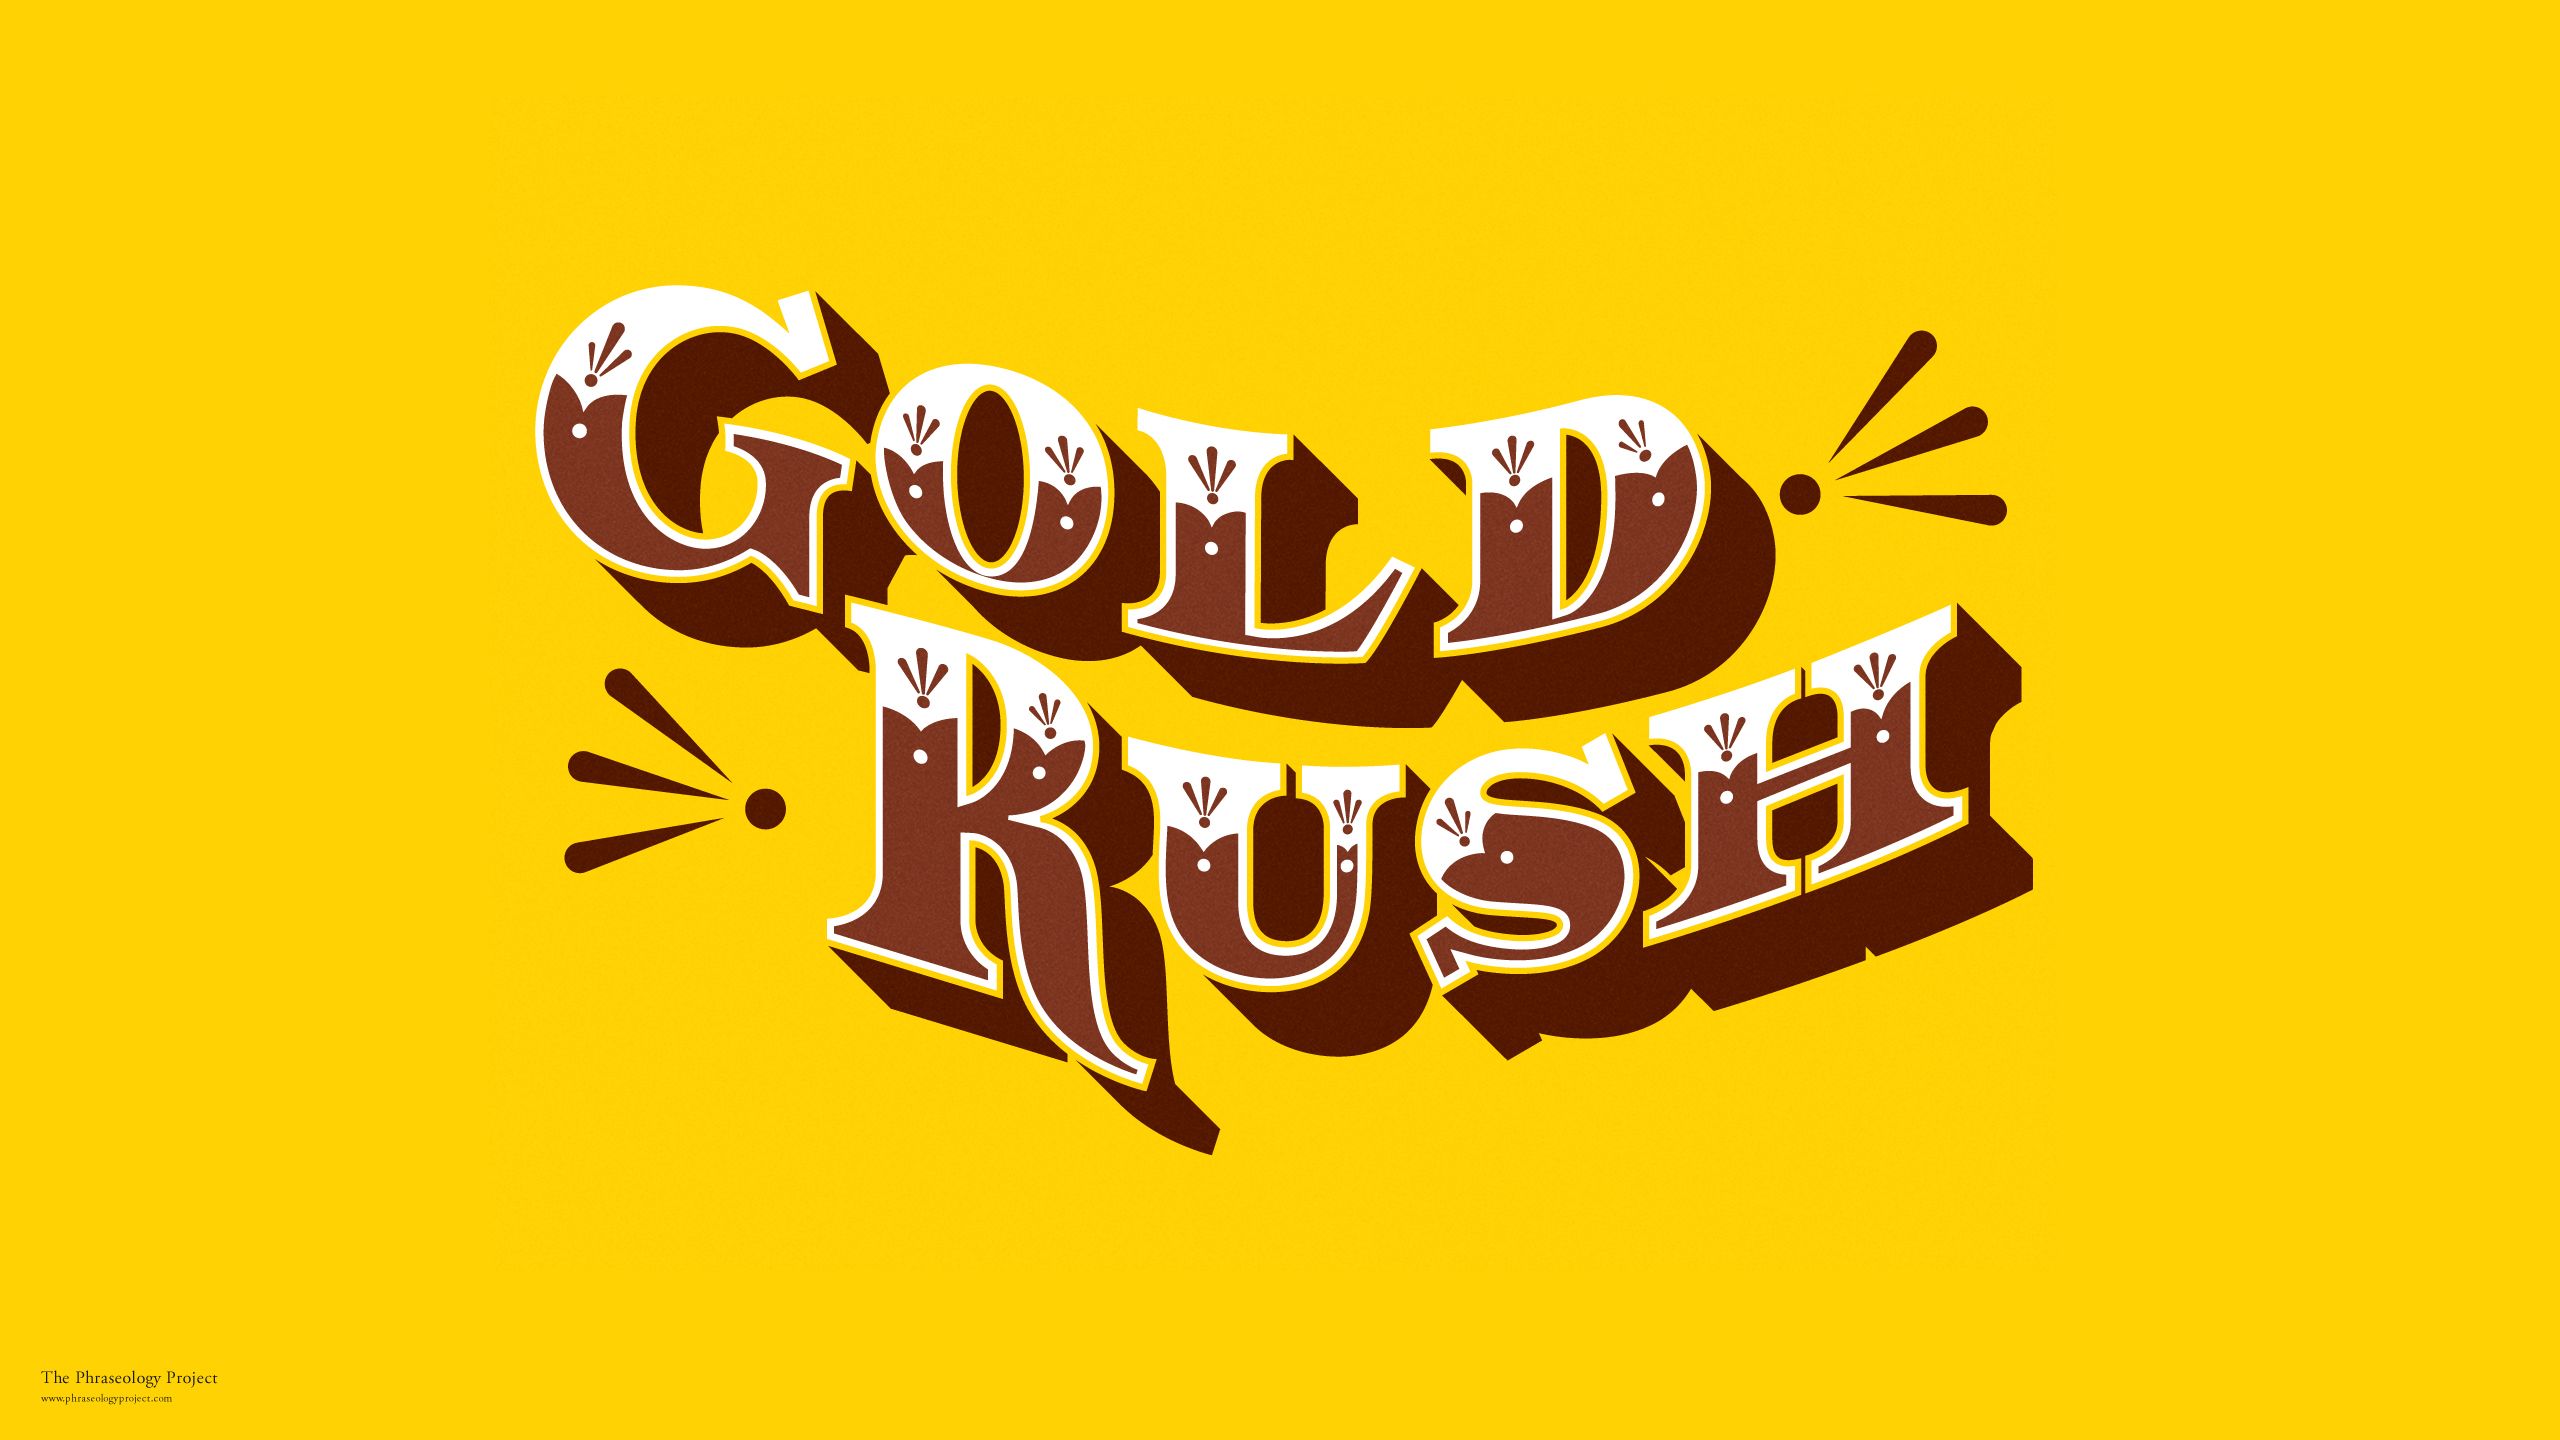 Free download Download Gold Rush Wallpaper Gallery [2560x1440] for your Desktop, Mobile & Tablet. Explore Gold Rush Wallpaper. Gold Rush Wallpaper, Rush Wallpaper, Rush Wallpaper